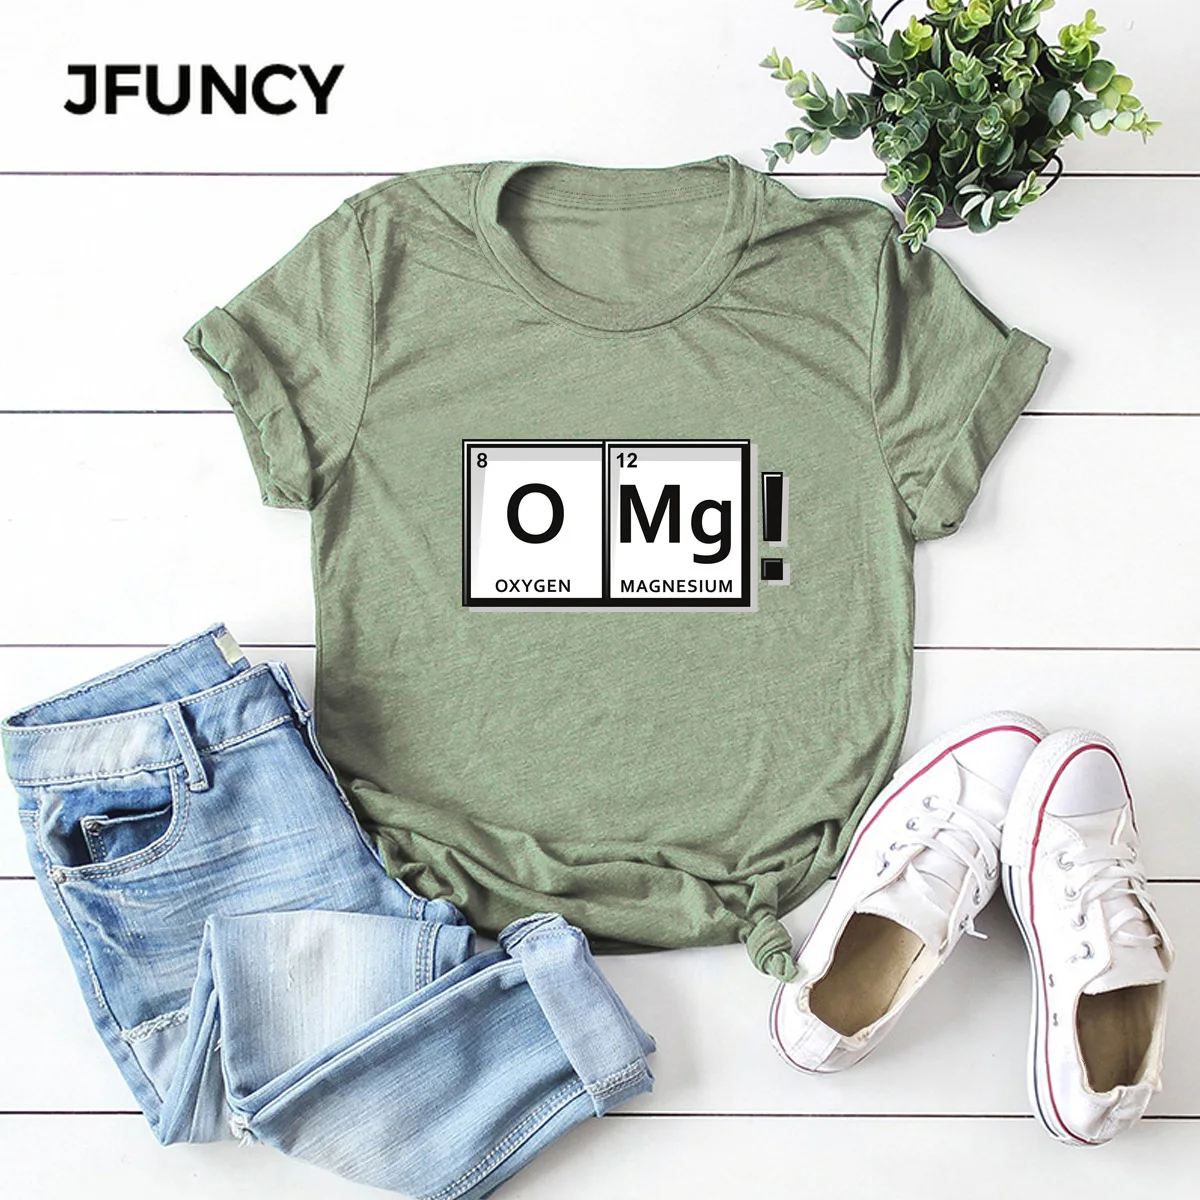 JFUNCY OMG Fun Chemistry Element Periodic Table Graphic Woman Tee Tops 100% Cotton Summer  Female T-shirt  Women Shirts